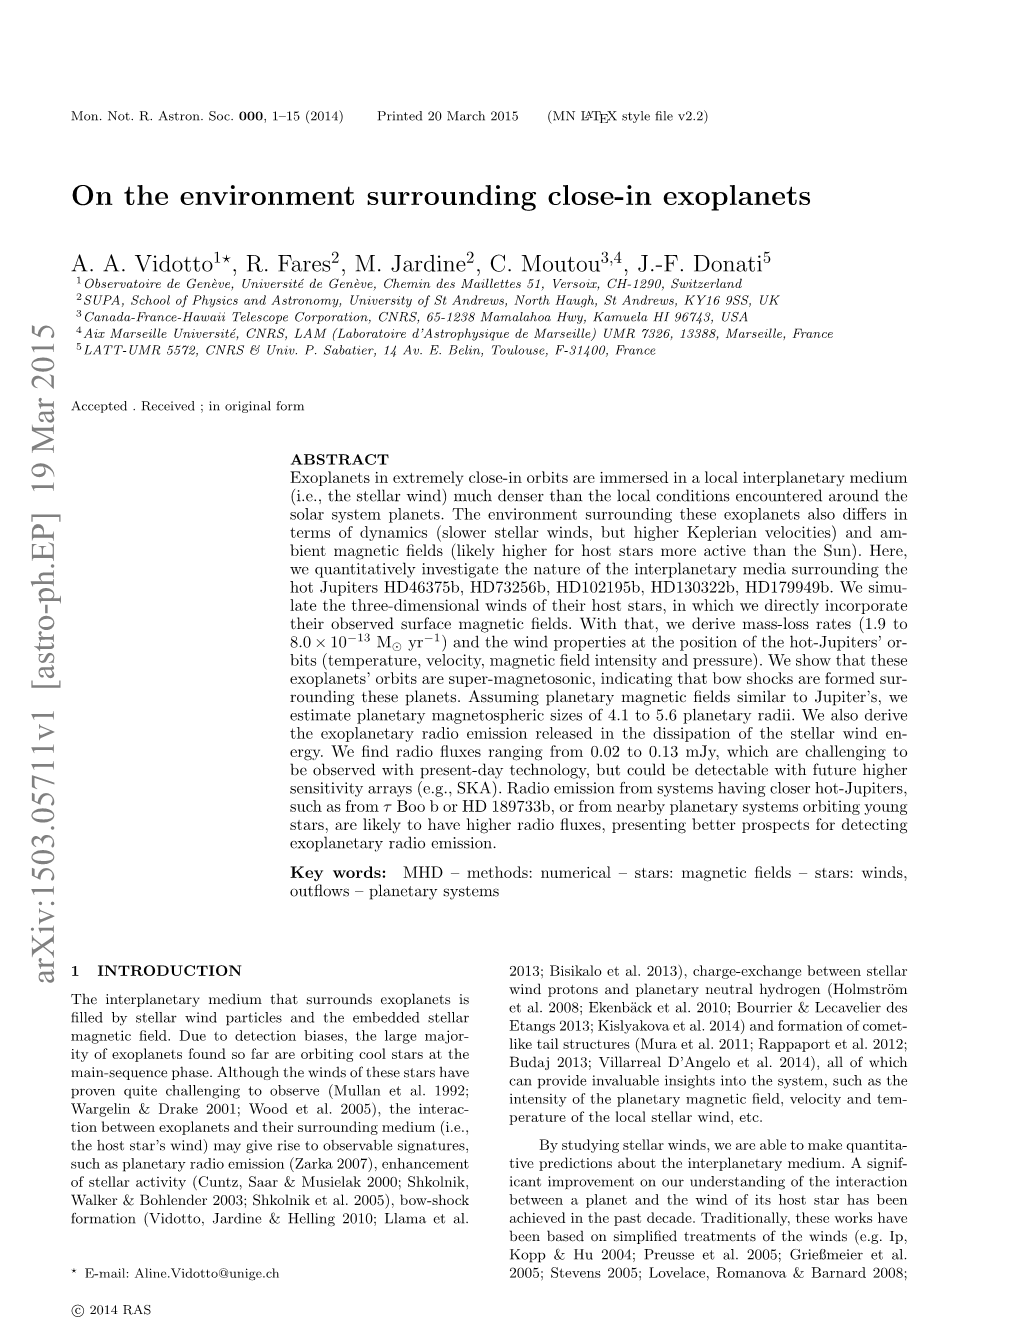 On the Environment Surrounding Close-In Exoplanets